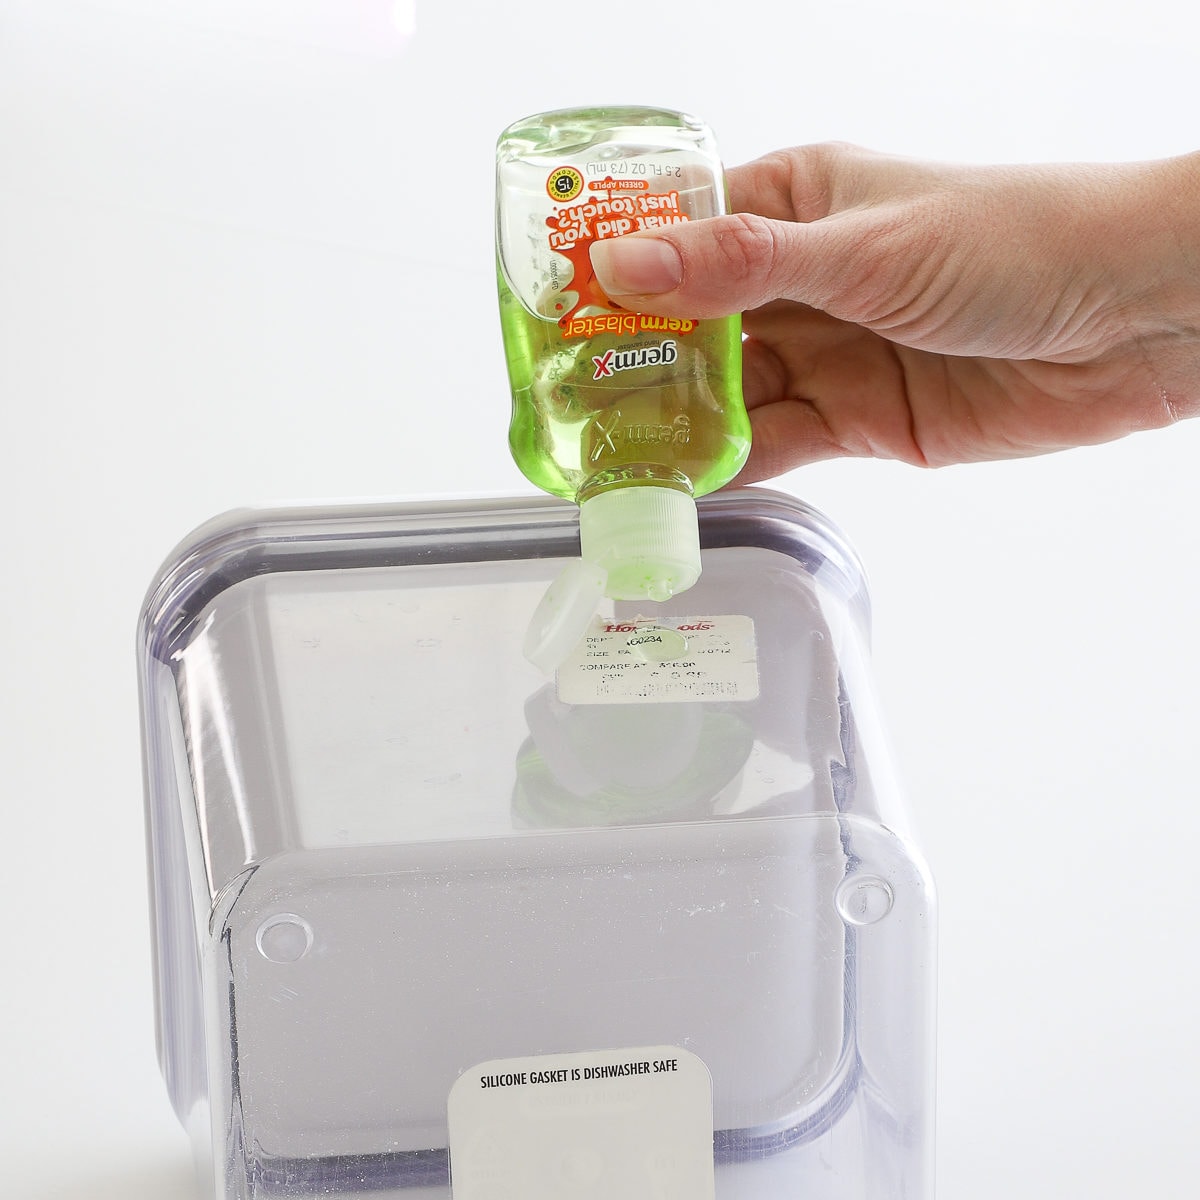 Hand applying hand sanitizer on a stubborn paper label to remove it